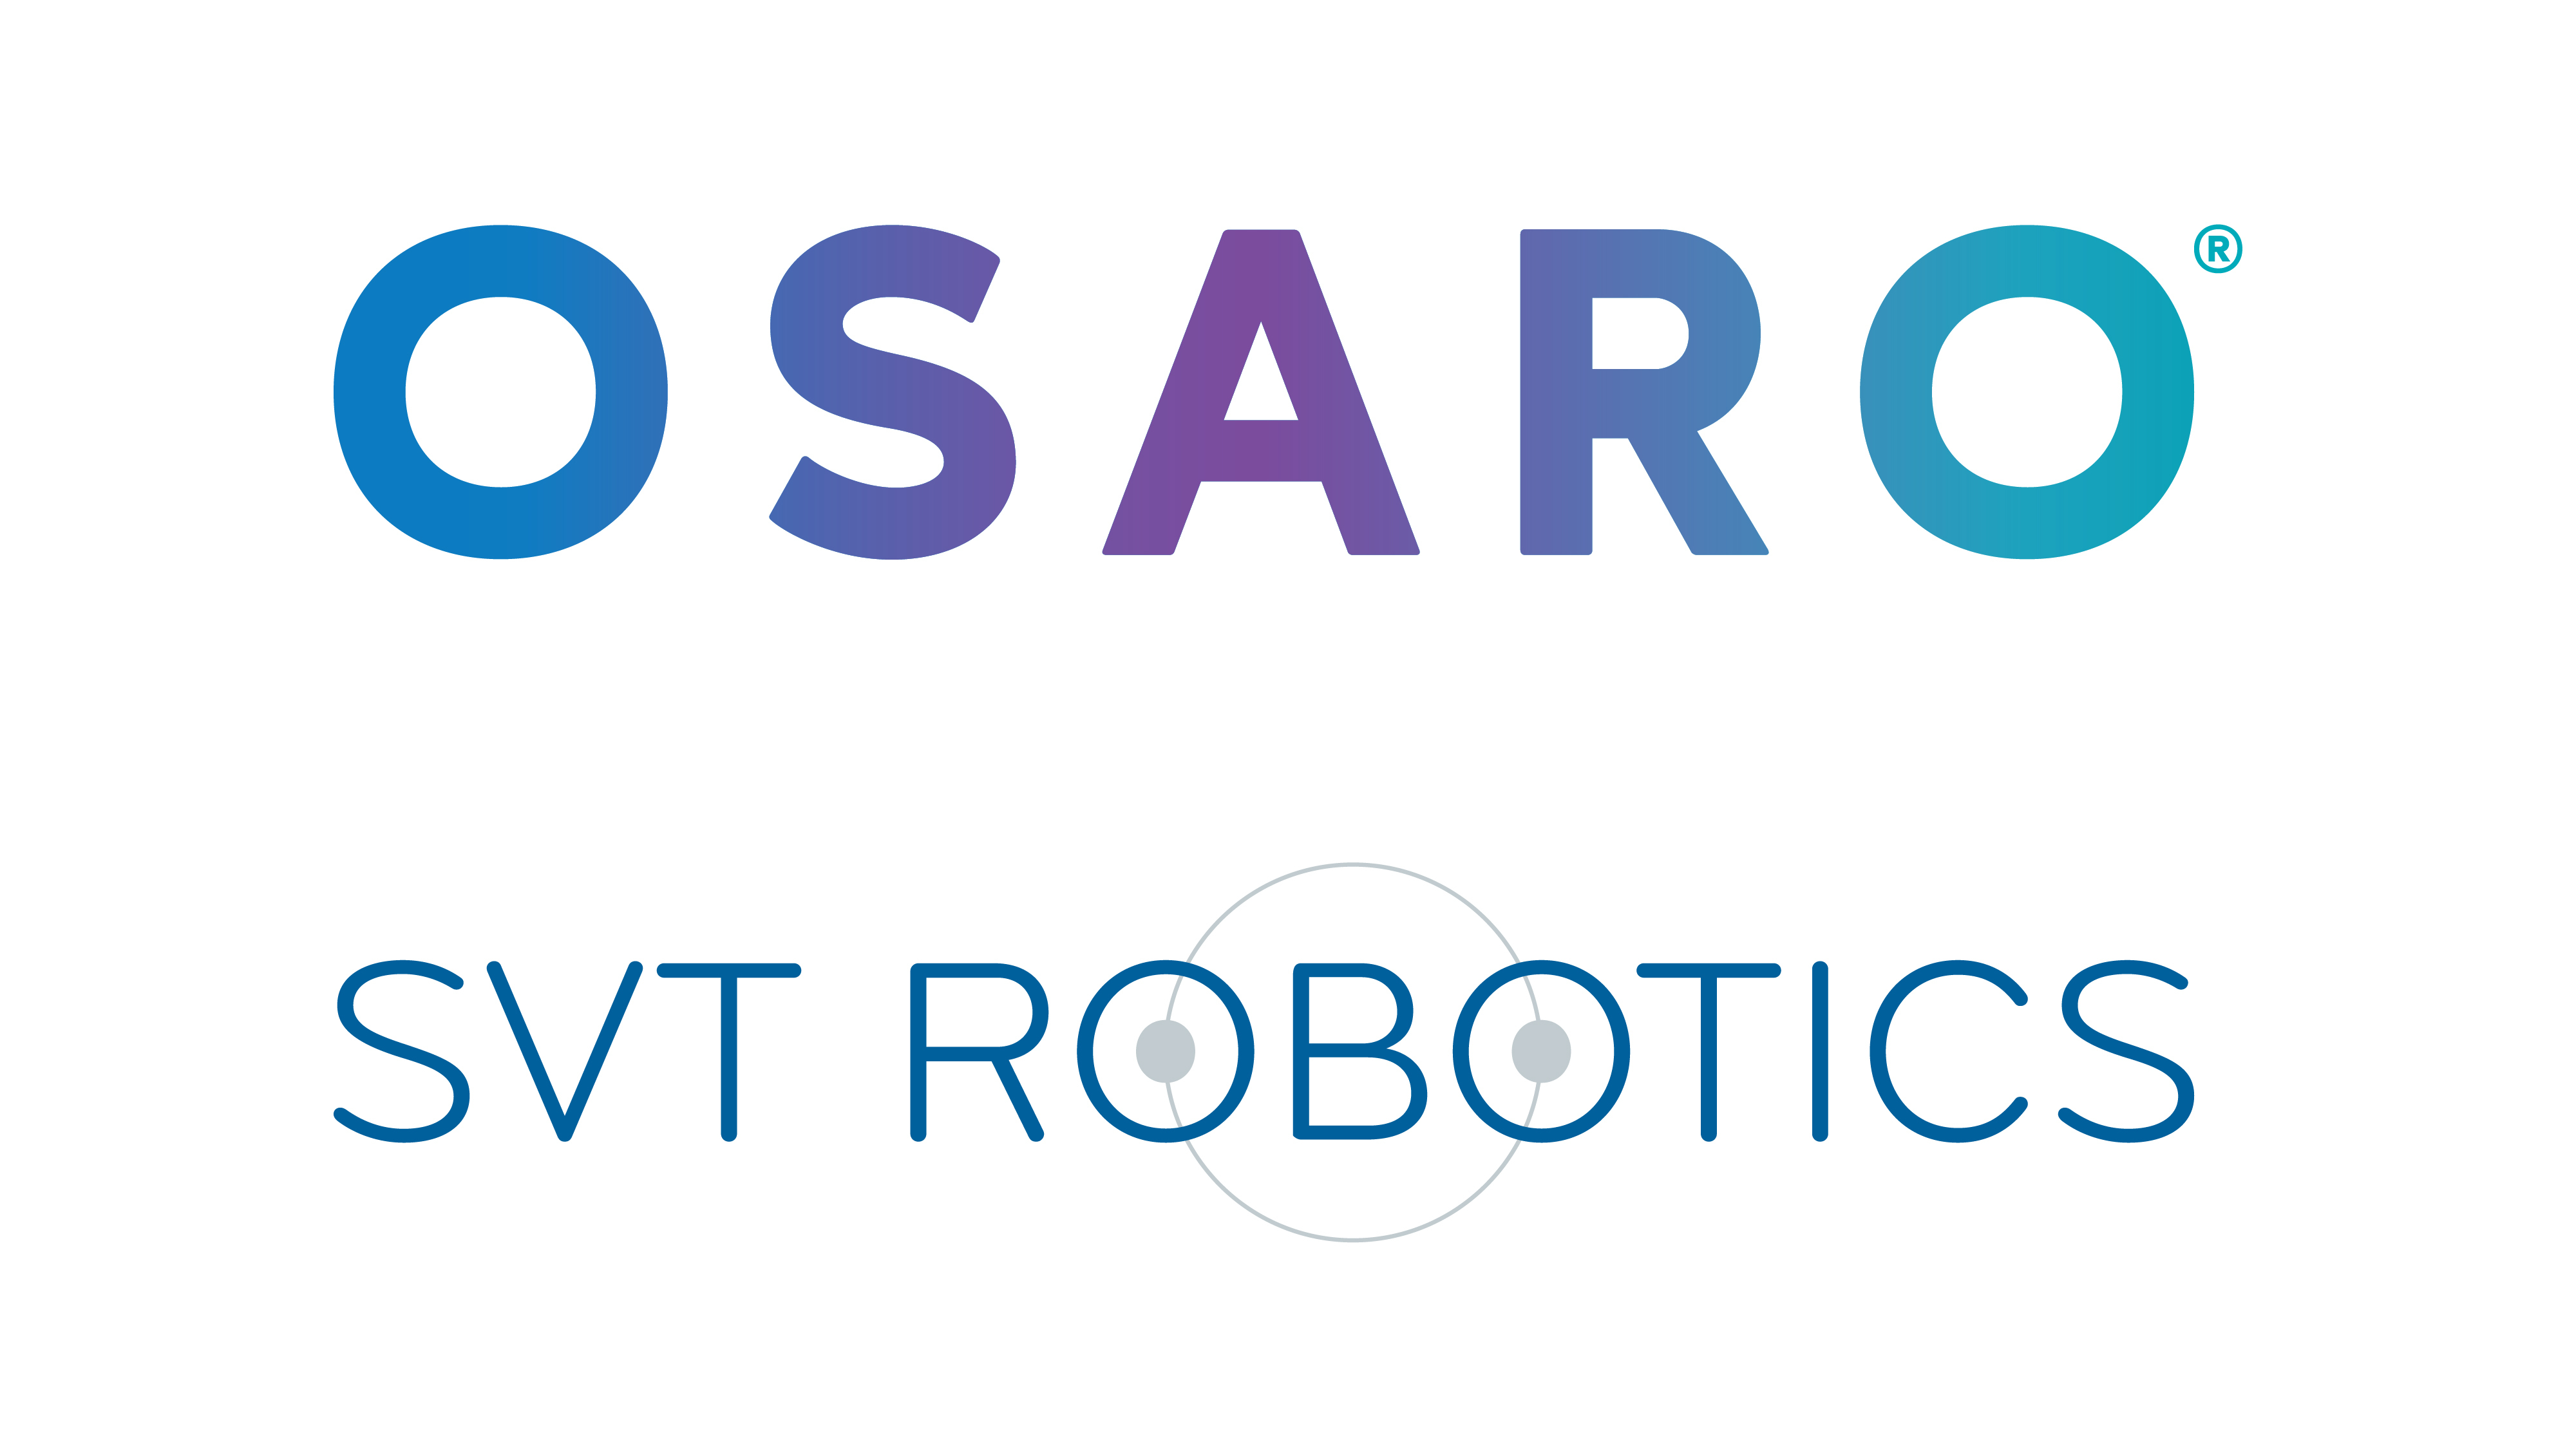 As part of the agreement, SVT Robotics has joined OSARO’s partner program, which offers one-stop access for businesses looking to deploy robotic solutions in their fulfillment operations.